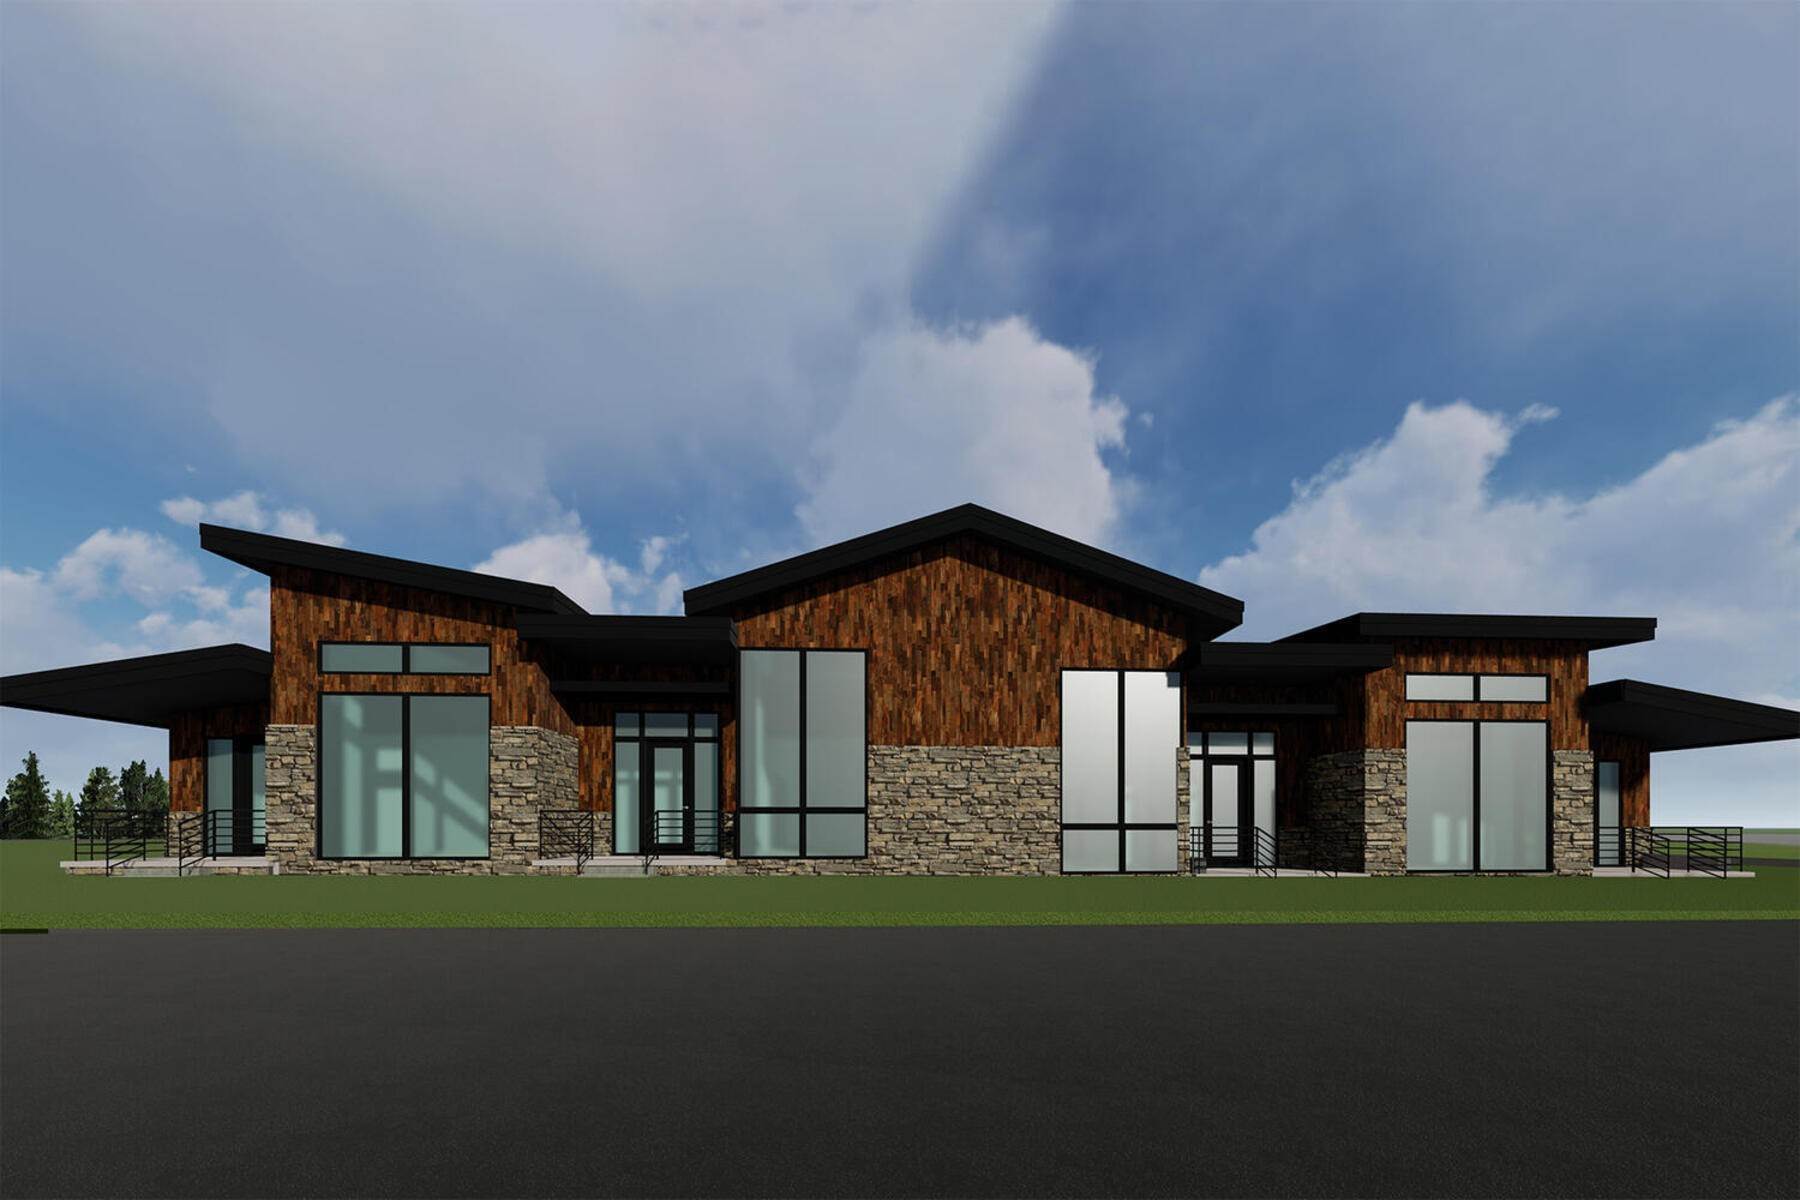 Property for Sale at Coming This Summer! Wasatch Springs Commercial/Mixed-Use Development 1068 W Wasatch Spring Rd #U-2 Kamas, Utah 84036 United States